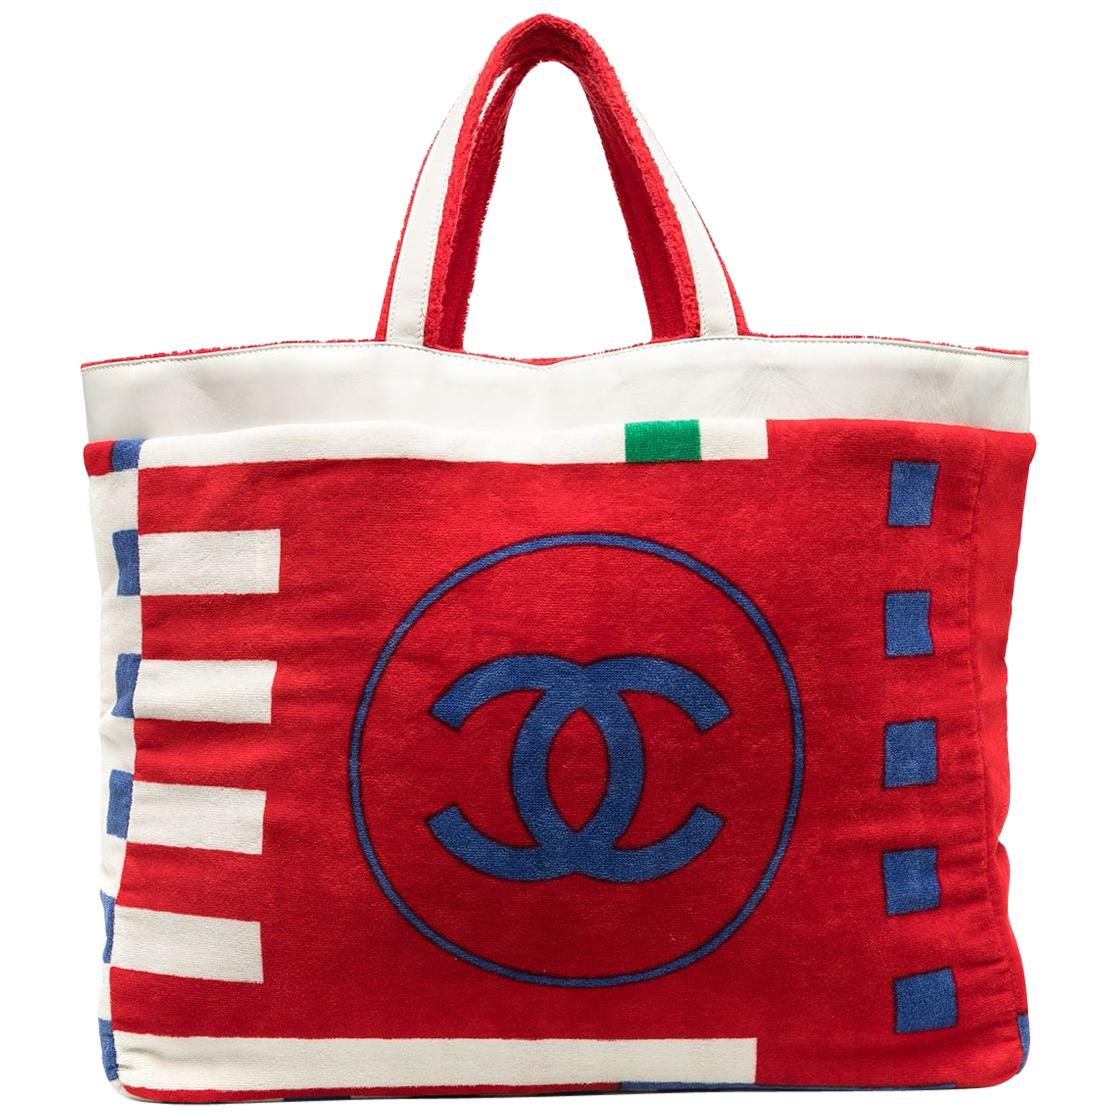 Chanel Vintage Jumbo Large CC Reversible Multicolor Lego Two Tone Red Beach Tote